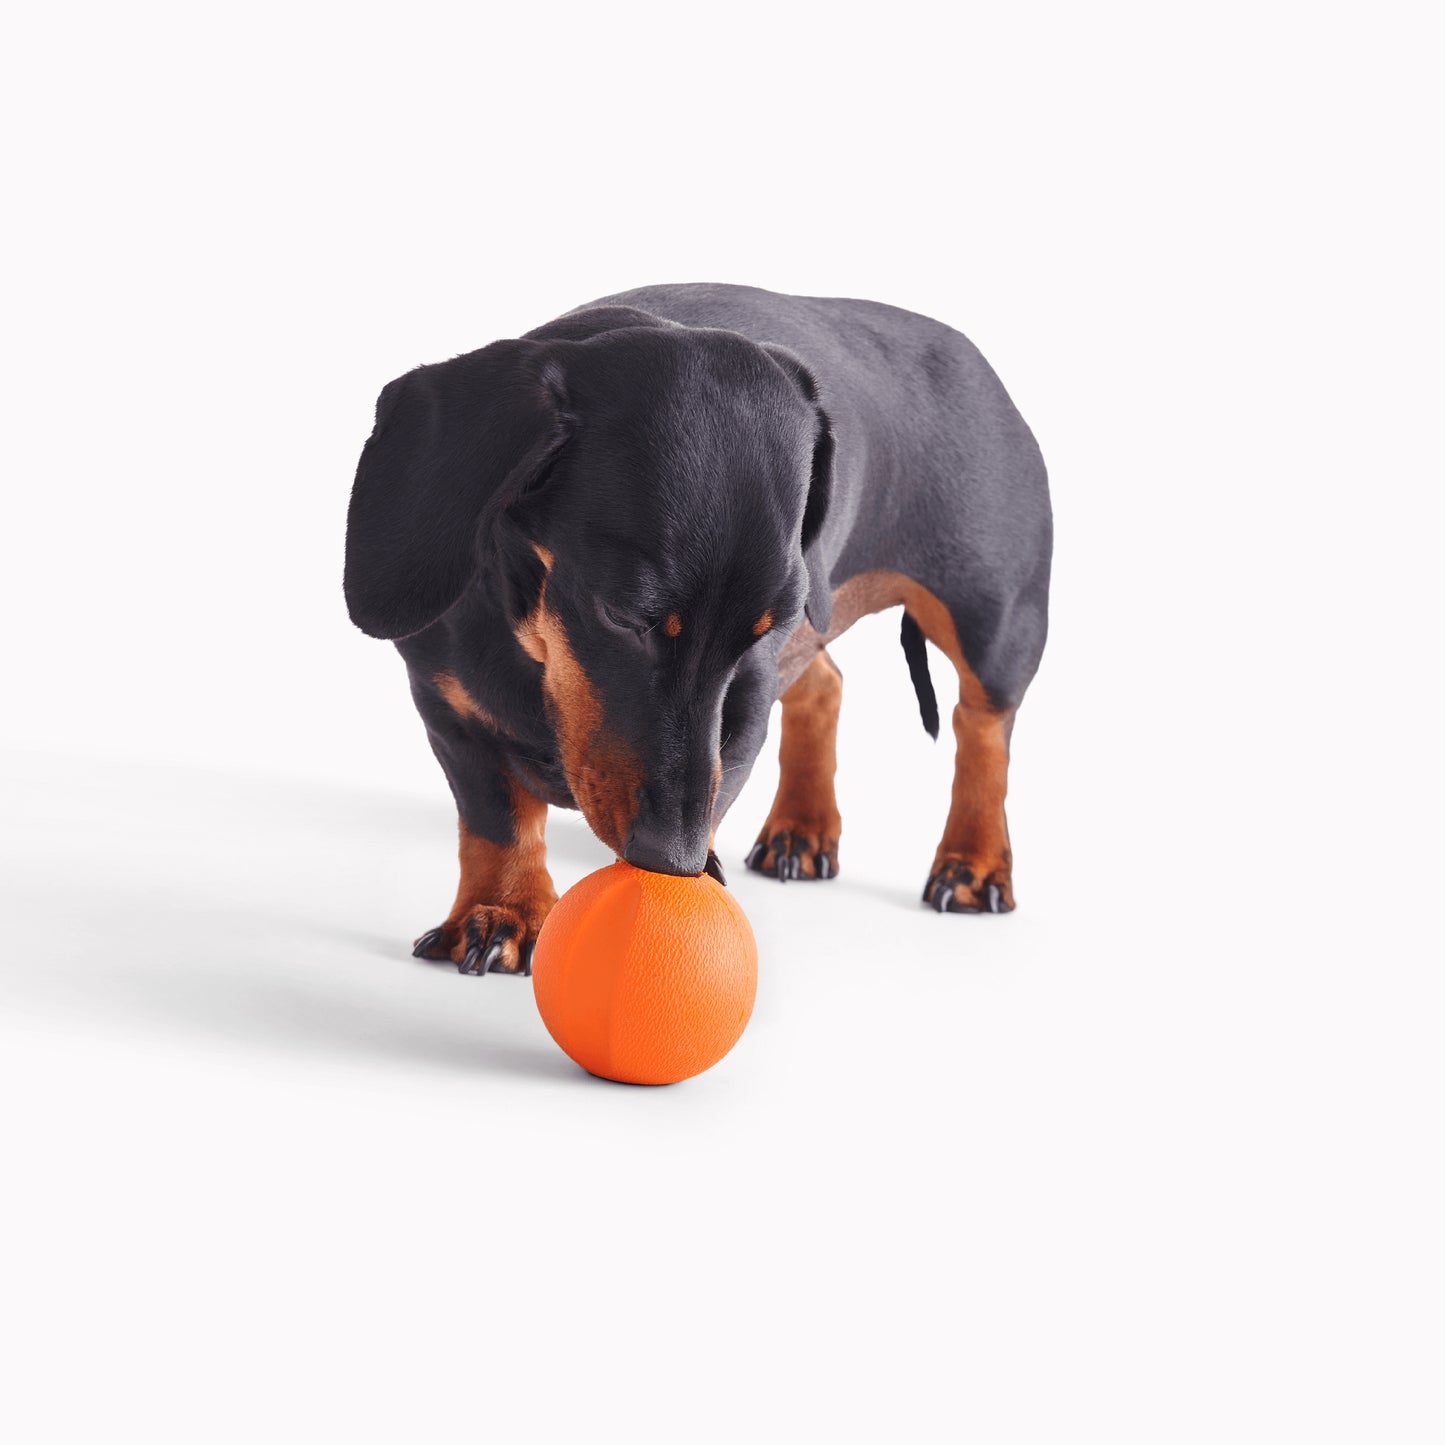 Beco Rubber Fetch Ball